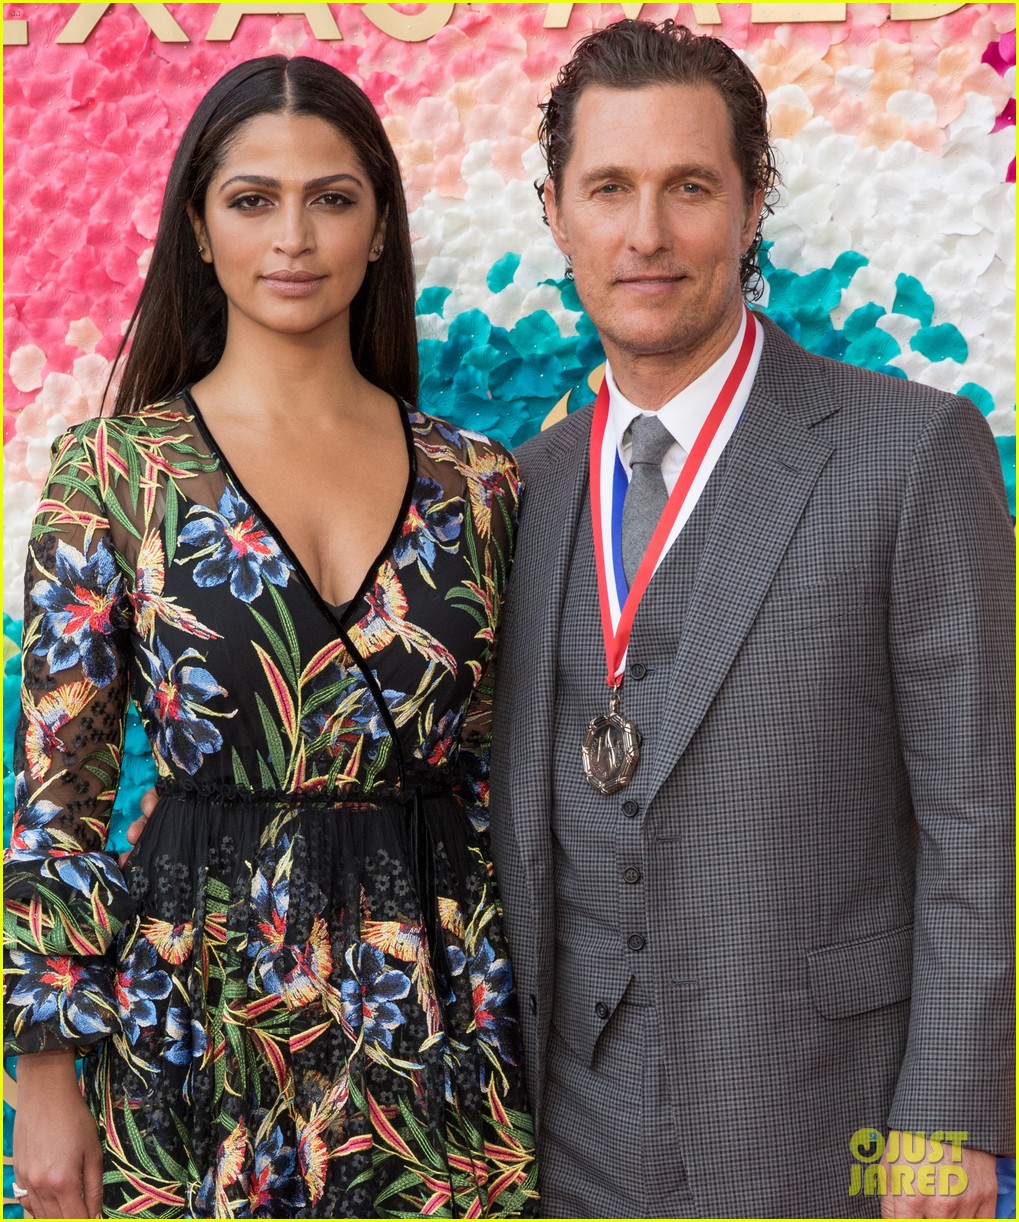 matthew mcconaughey gets honored at texas medal of arts awards with family by his side 01